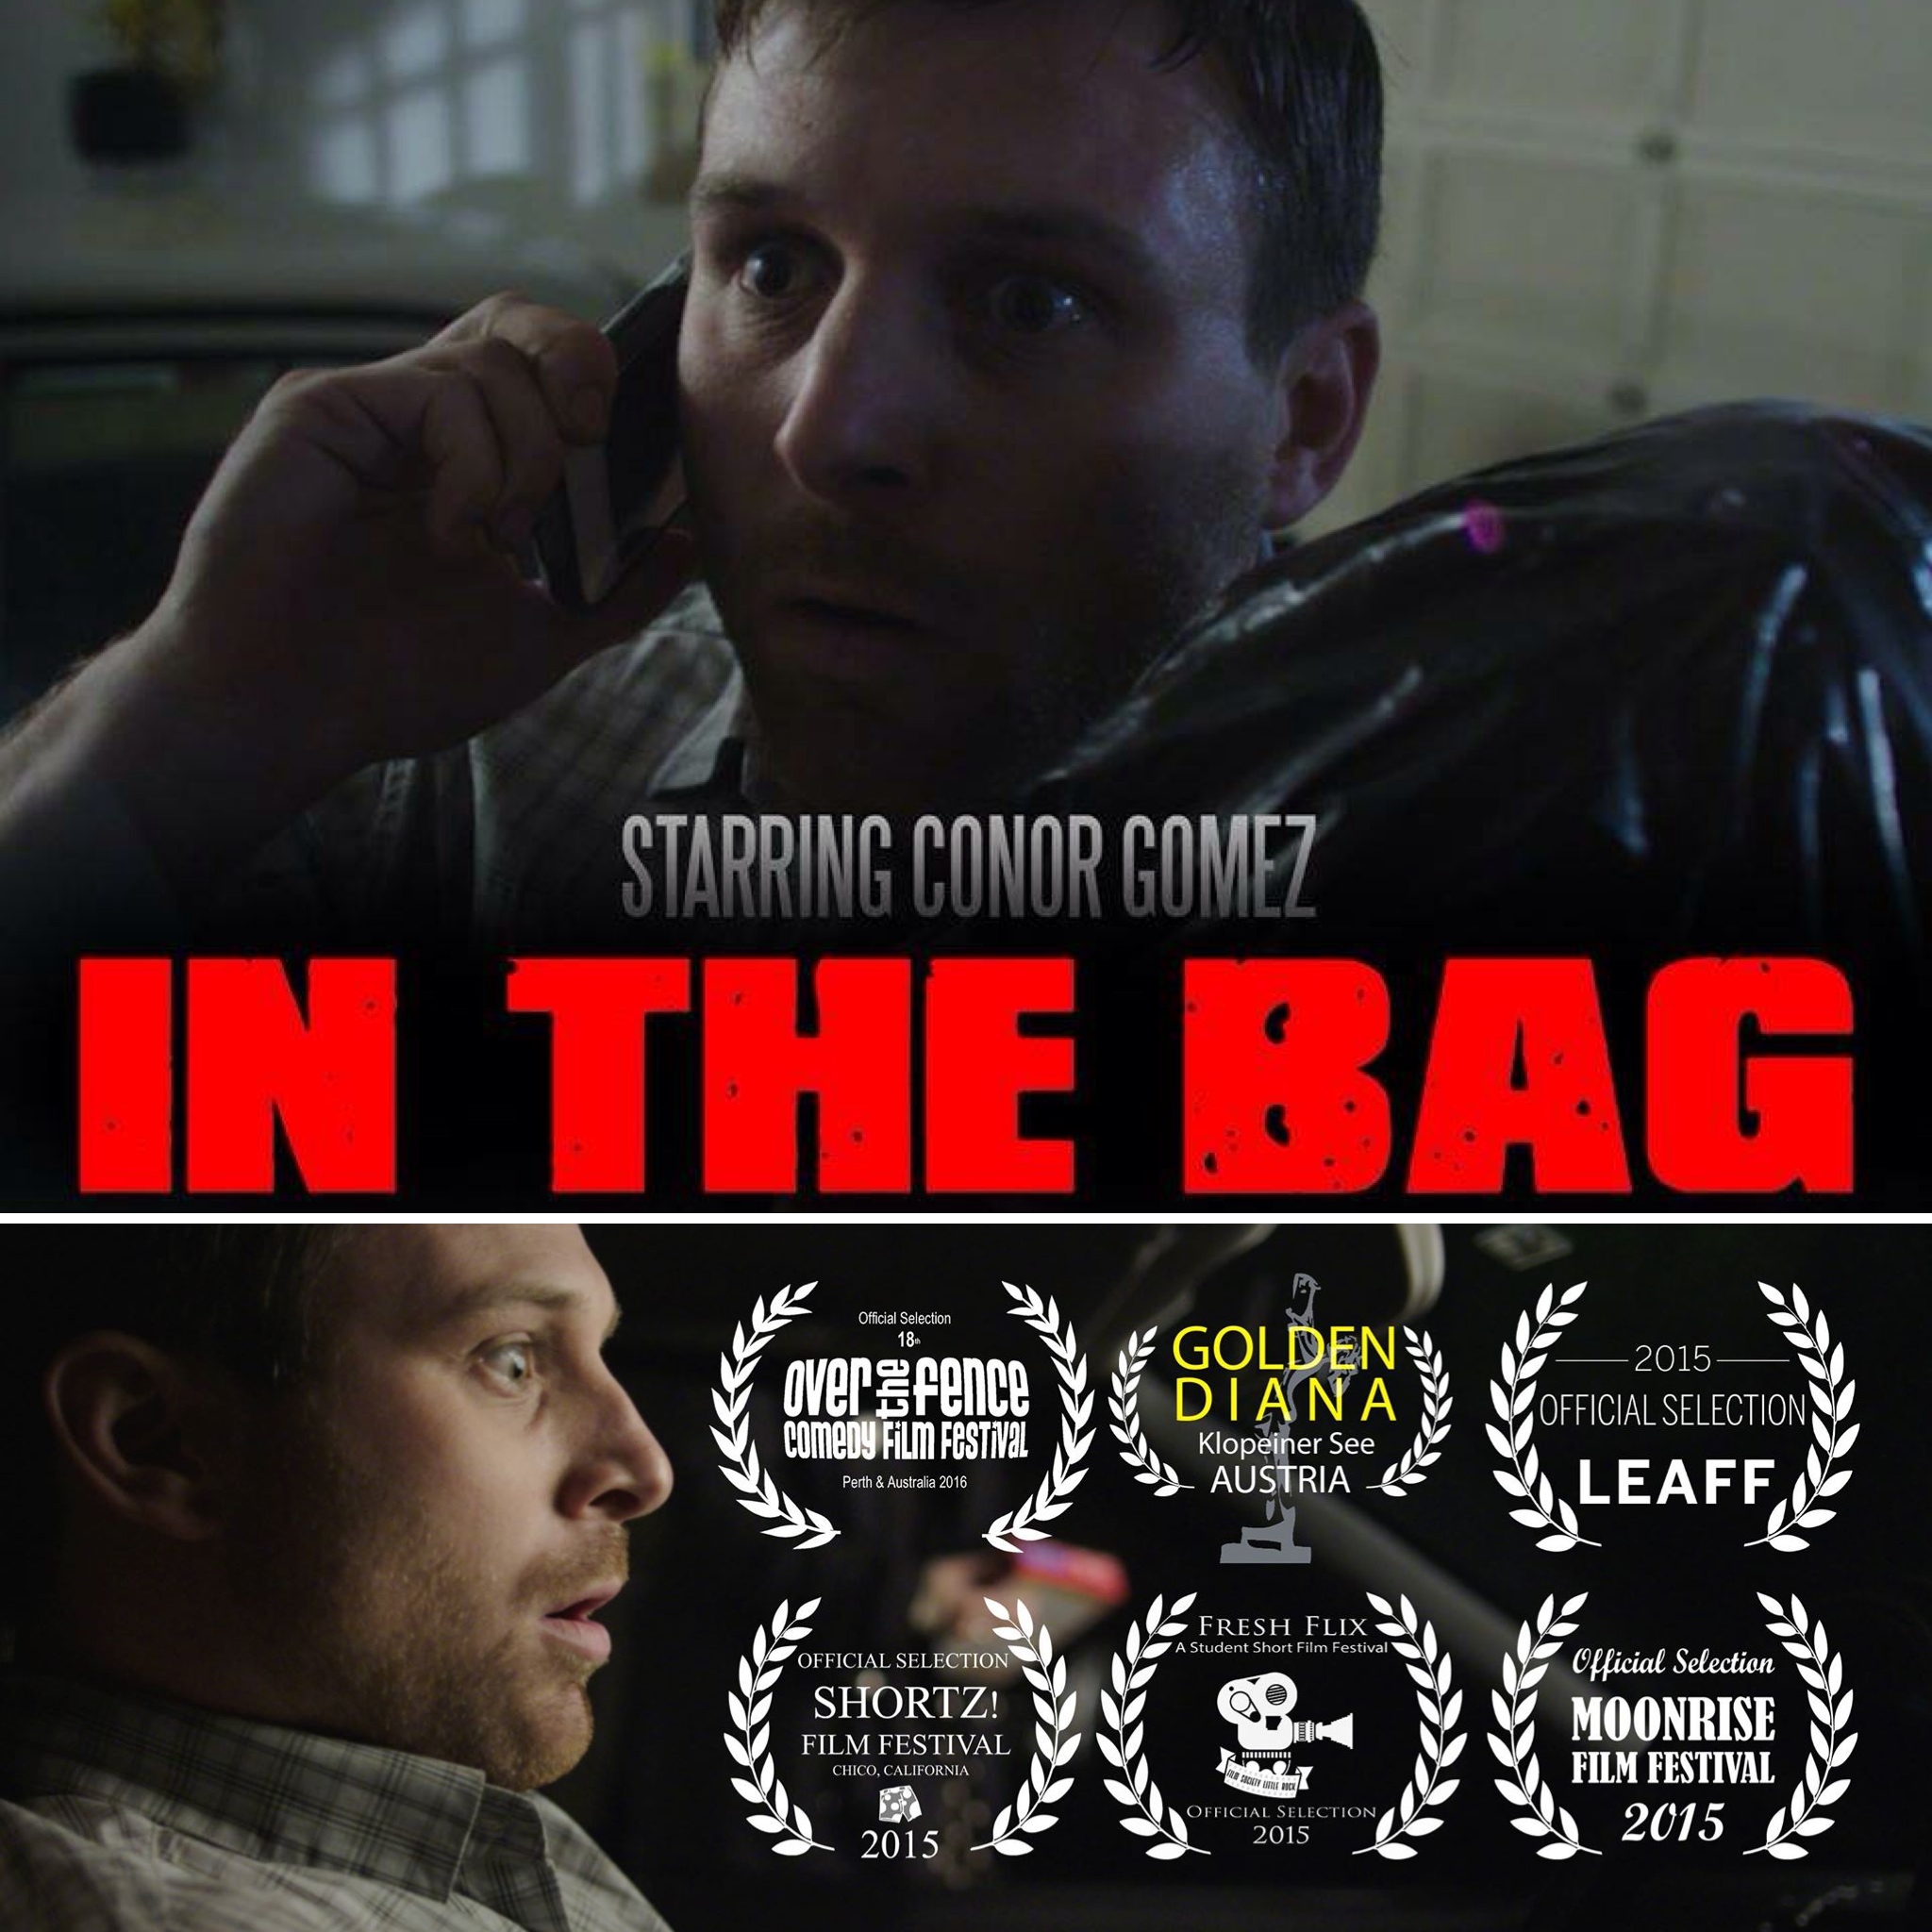 Conor Gomez as Dan in the dark comedy In The Bag by Cole Northey. The film recently screened at the Over The Fence Comedy Film Festival and will be touring Australia in 2016. Also nominated for a Golden Diana Award in Austria. Info: inthebagfilm.com